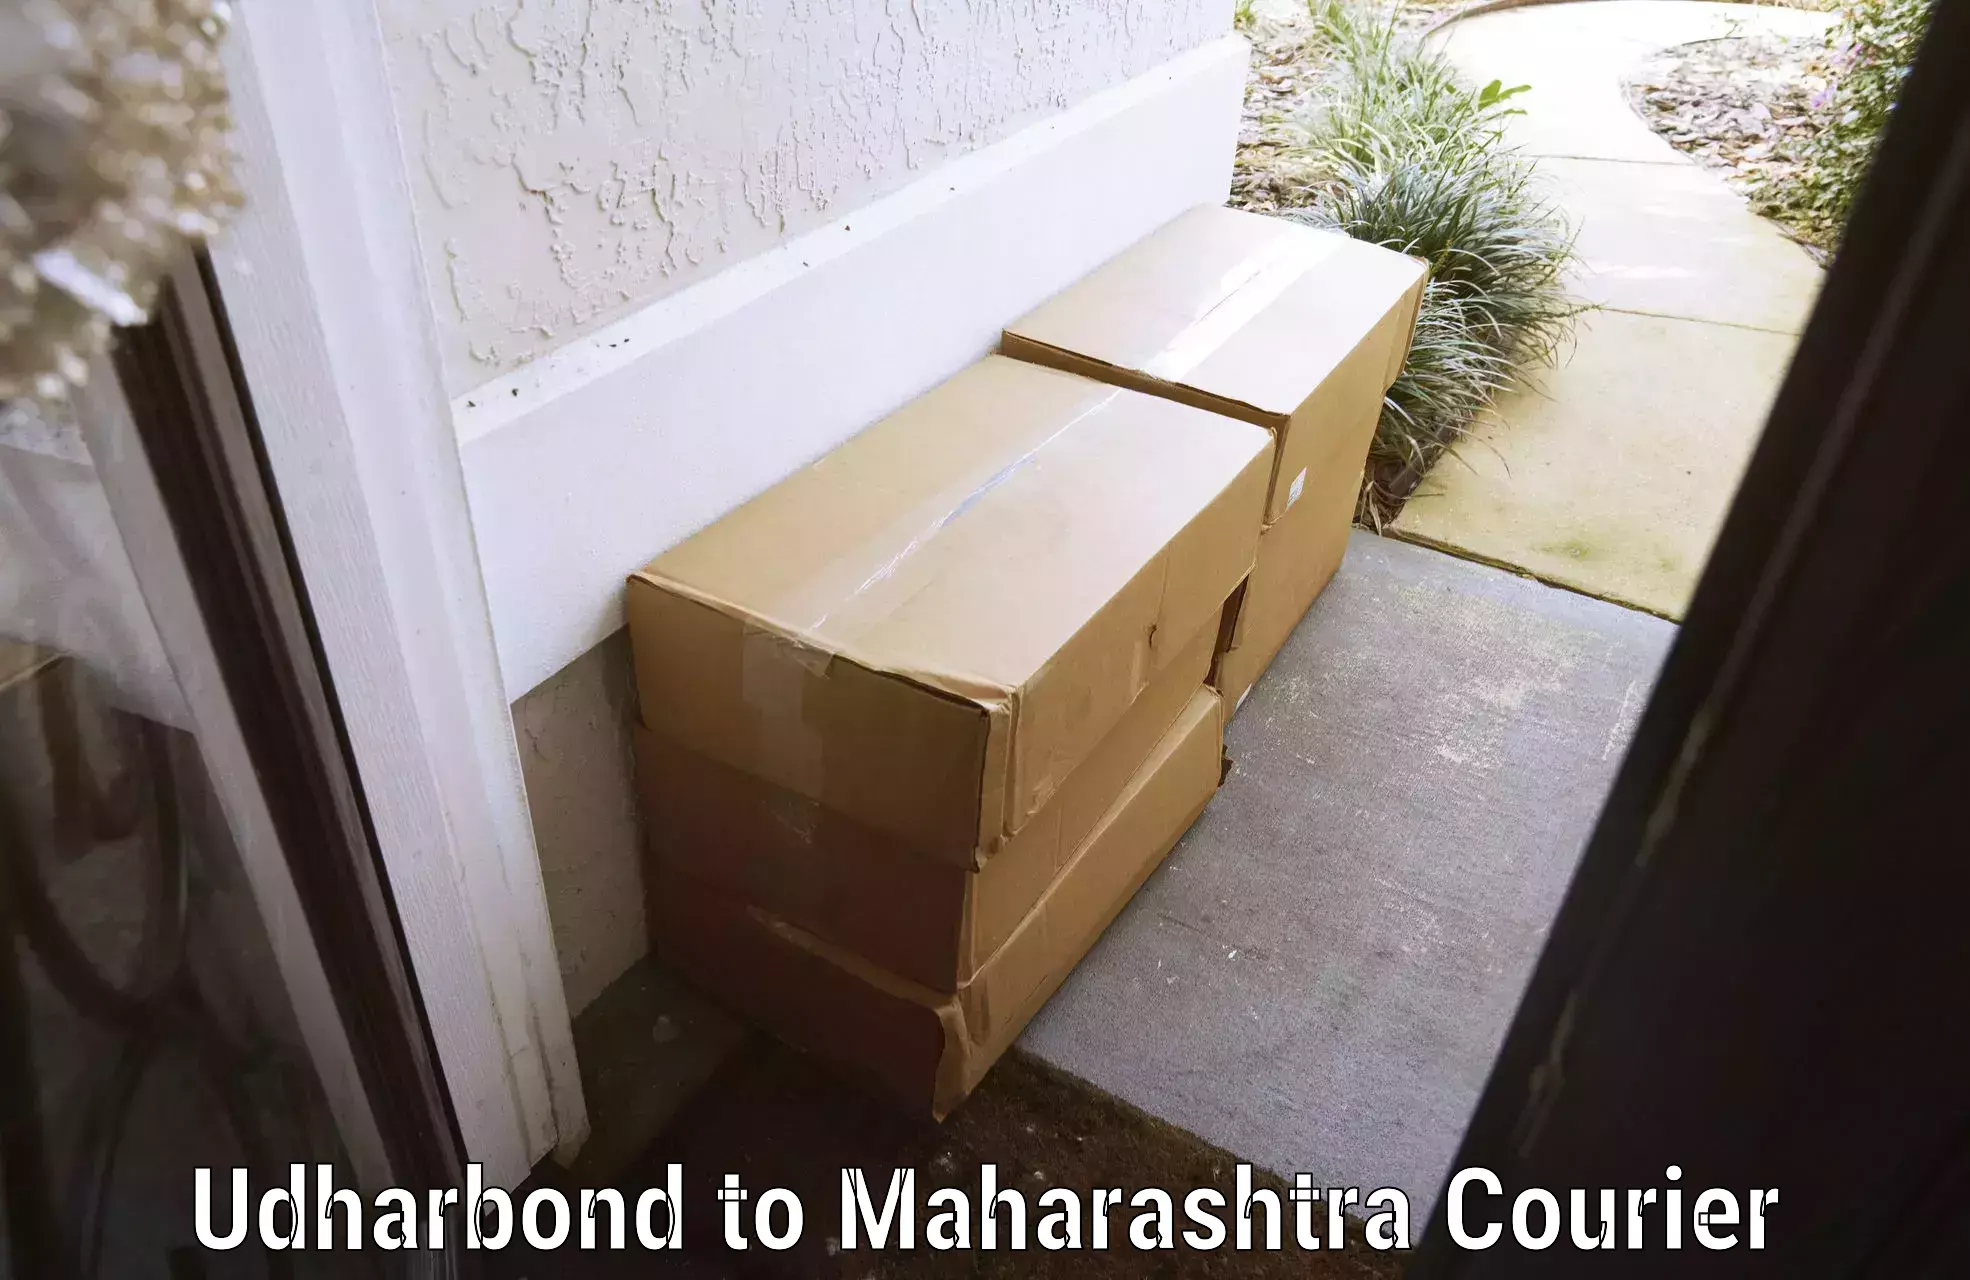 Personal effects shipping in Udharbond to Vadgaon